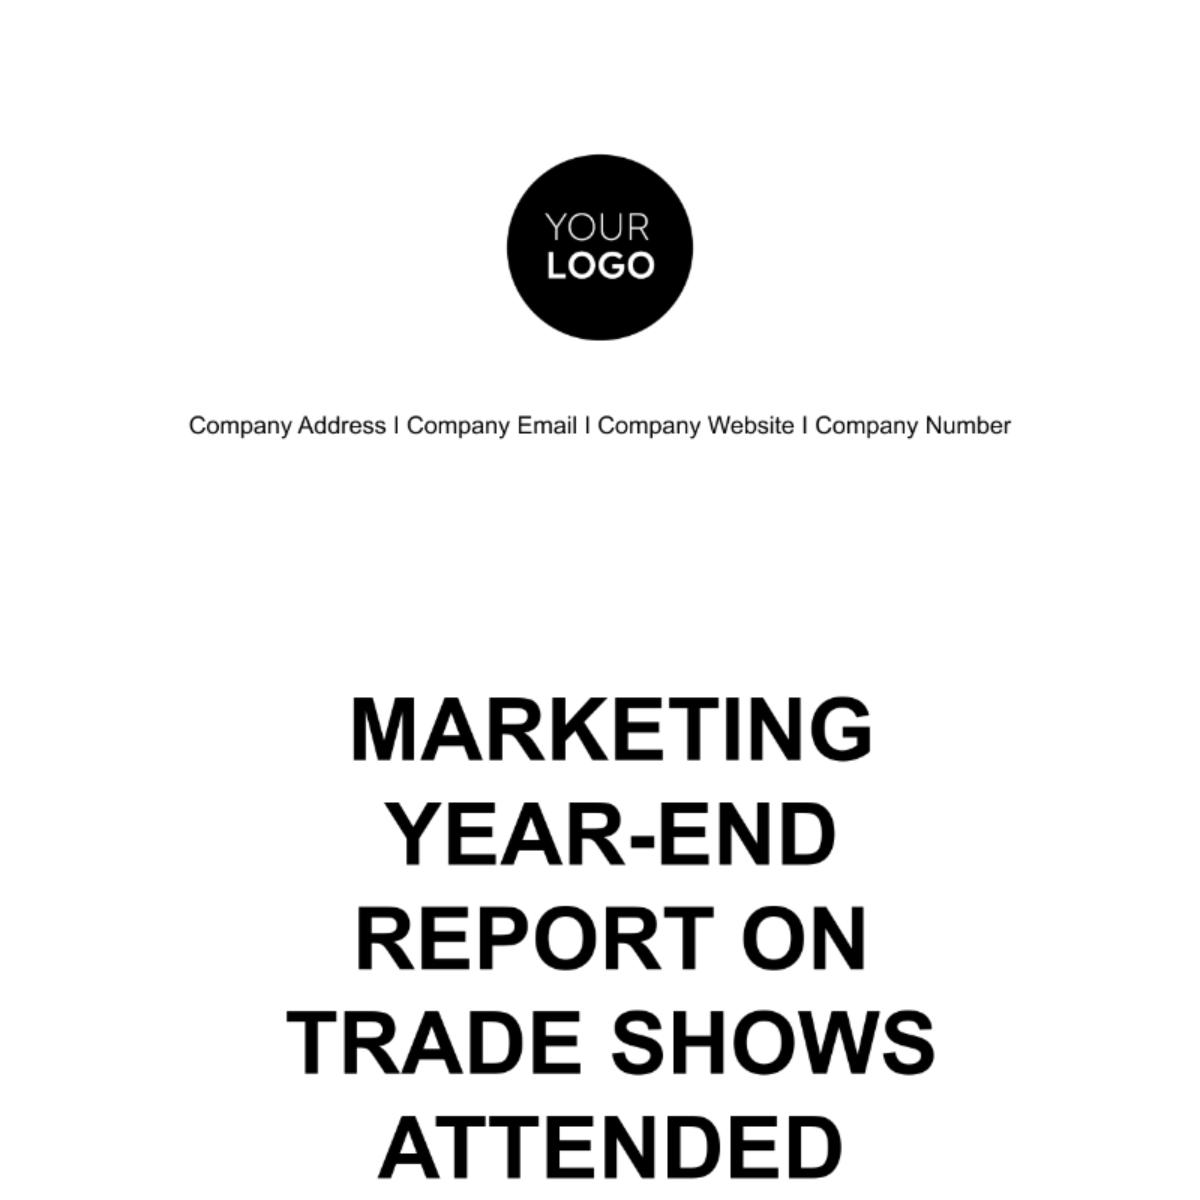 Marketing Year-end Report on Trade Shows Attended Template